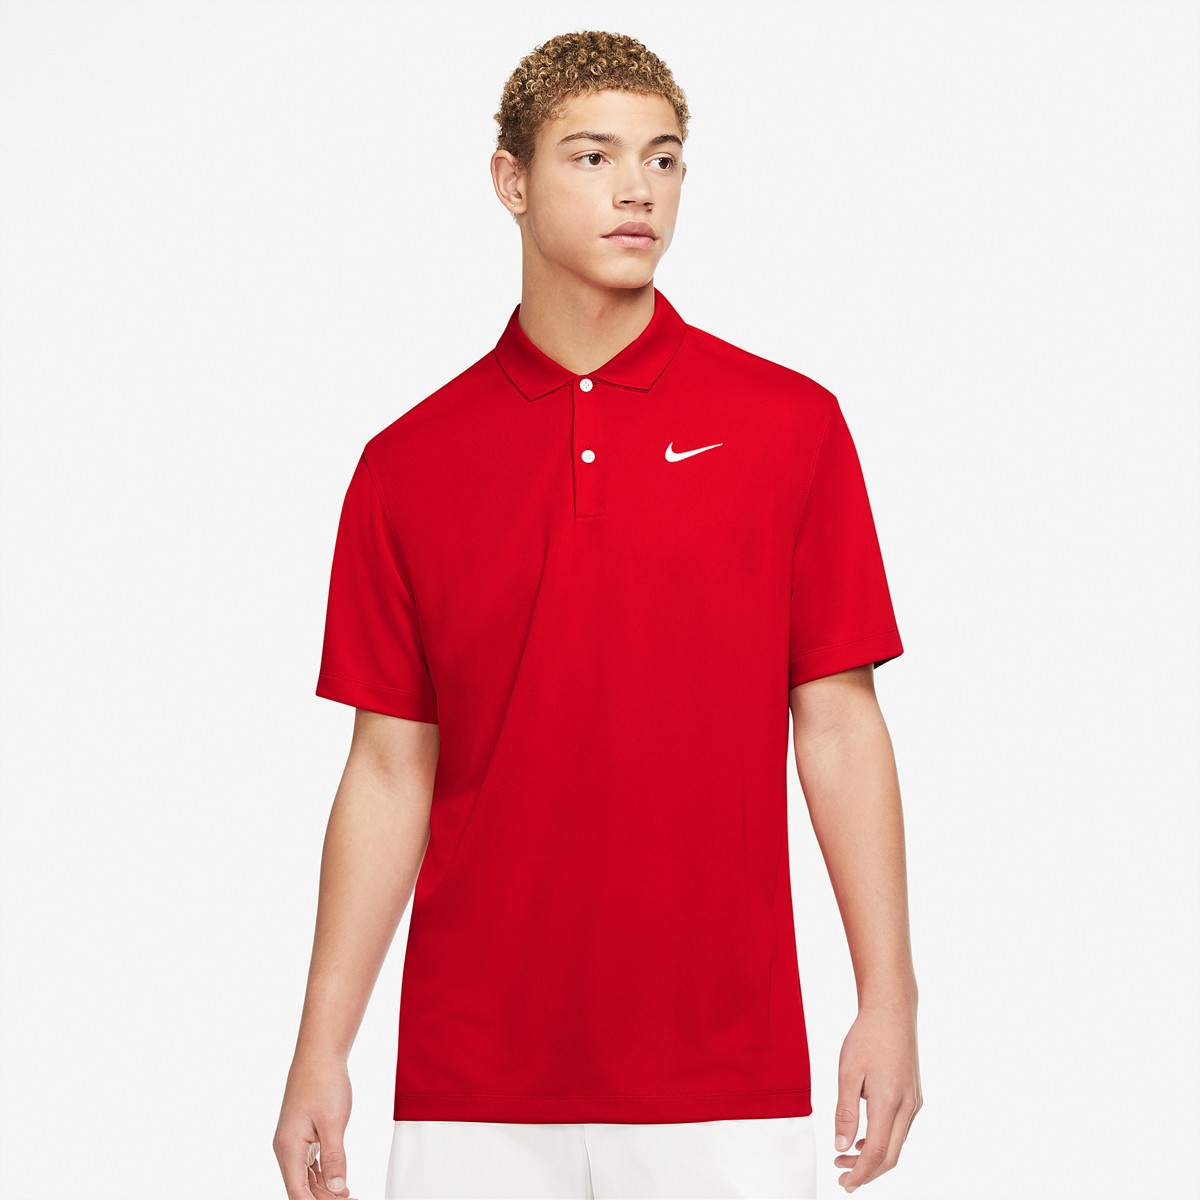 POLO NIKE COURT DRI FIT SOLID VICTORY